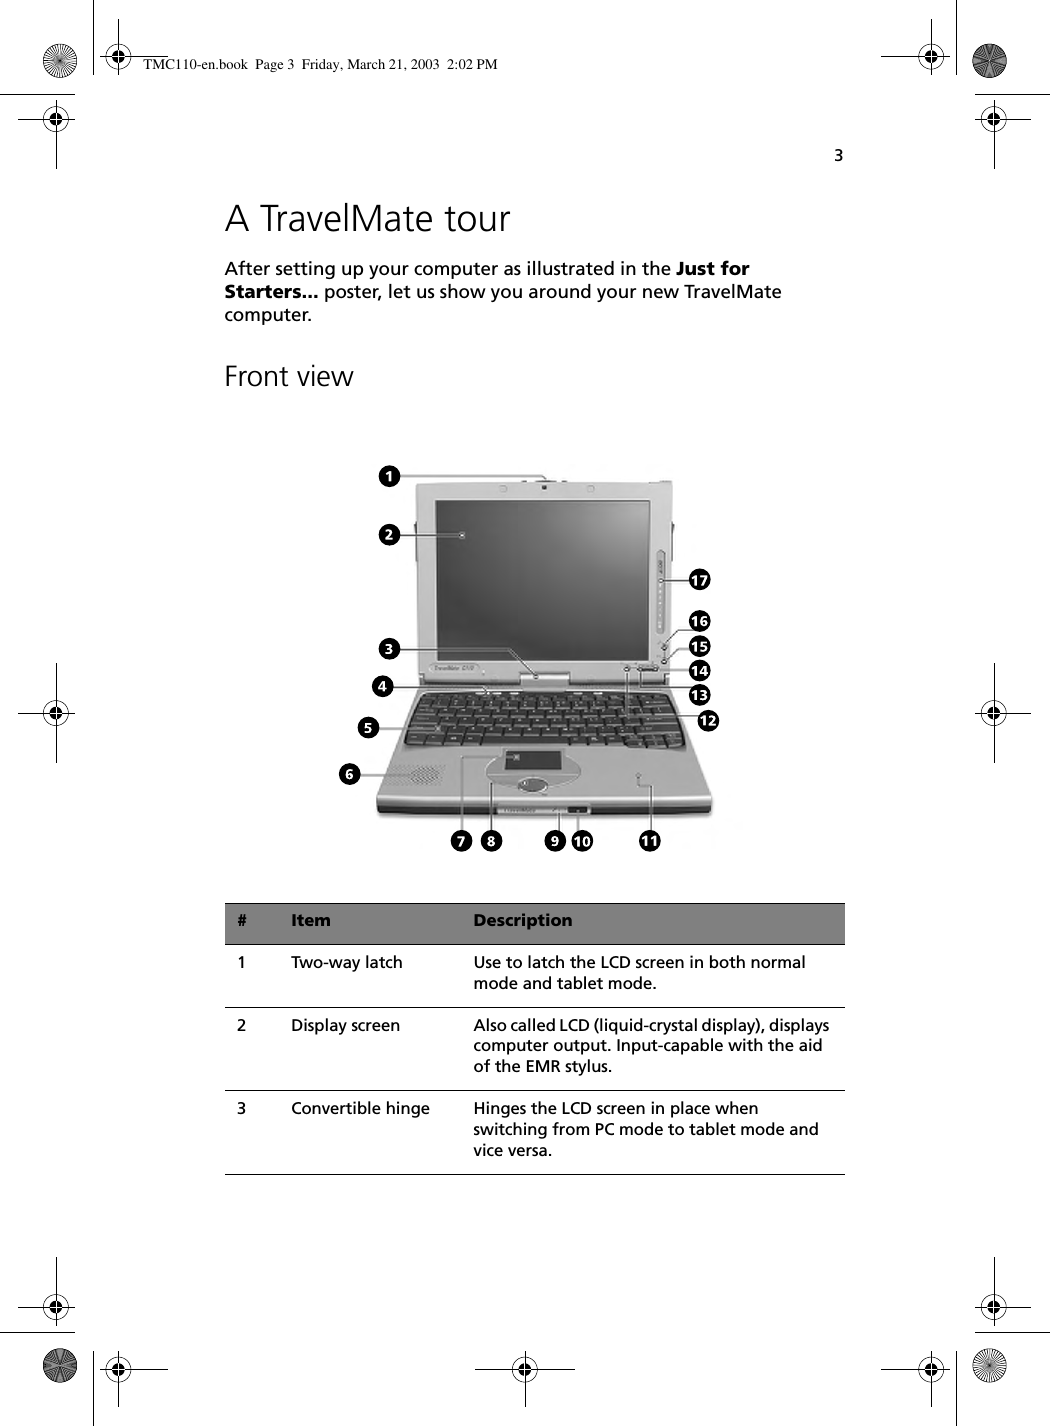 3A TravelMate tourAfter setting up your computer as illustrated in the Just for Starters... poster, let us show you around your new TravelMate computer.Front view# Item Description1Two-way latch Use to latch the LCD screen in both normal mode and tablet mode.2Display screen Also called LCD (liquid-crystal display), displays computer output. Input-capable with the aid of the EMR stylus.3Convertible hinge Hinges the LCD screen in place when switching from PC mode to tablet mode and vice versa.TMC110-en.book  Page 3  Friday, March 21, 2003  2:02 PM